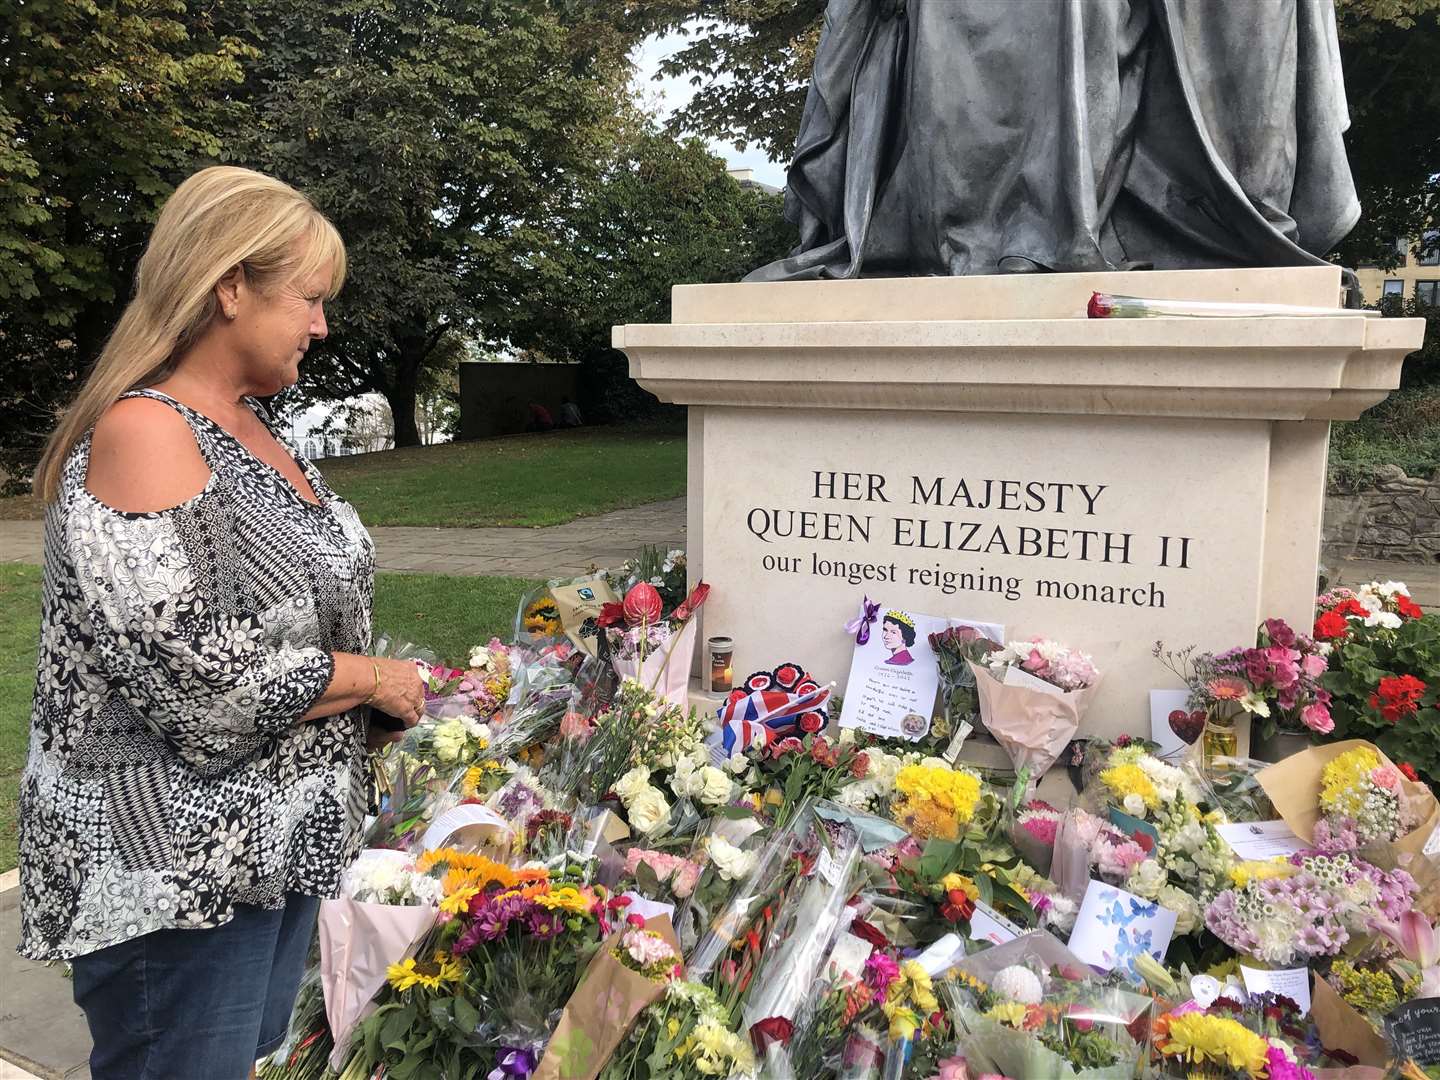 Kay Reynolds looking at the tributes left at the Queen Elizabeth II statue in Gravesend